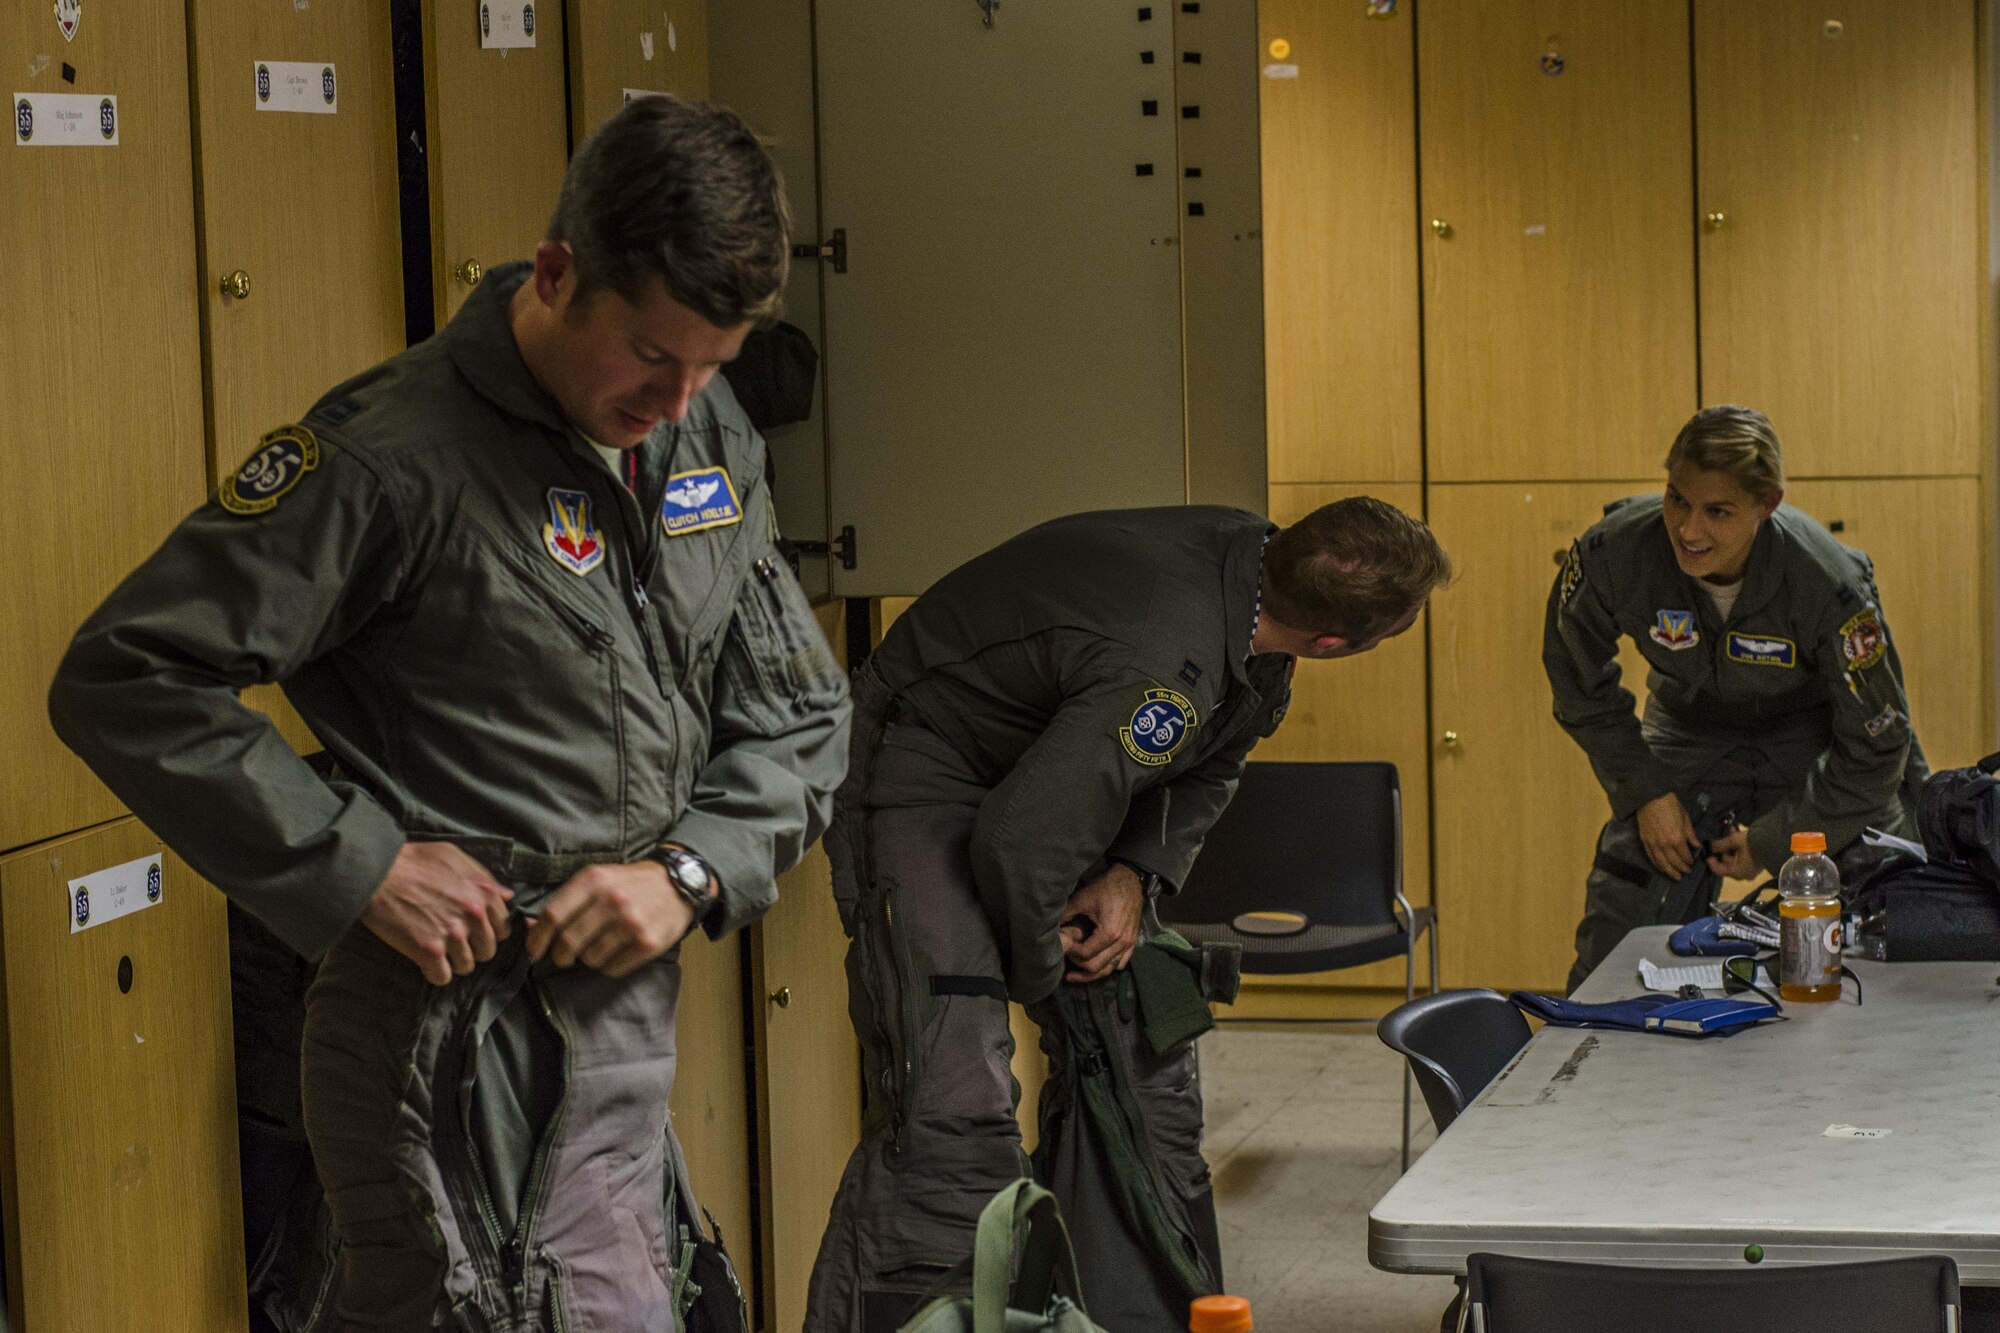 U.S. Air Force pilots from the 55th Fighter Squadron, Shaw Air Force Base, S.C., attach their g‐suites in preparation for a familiarization flight at Nellis Air Force Base, Nev., Aug. 13, 2016. The g‐suite is used to squeeze blood from the legs into the head while at high speeds enabling the pilots to fly longer hours. (U. S. Air Force photo by Tech. Sgt. Frank Miller/Released)